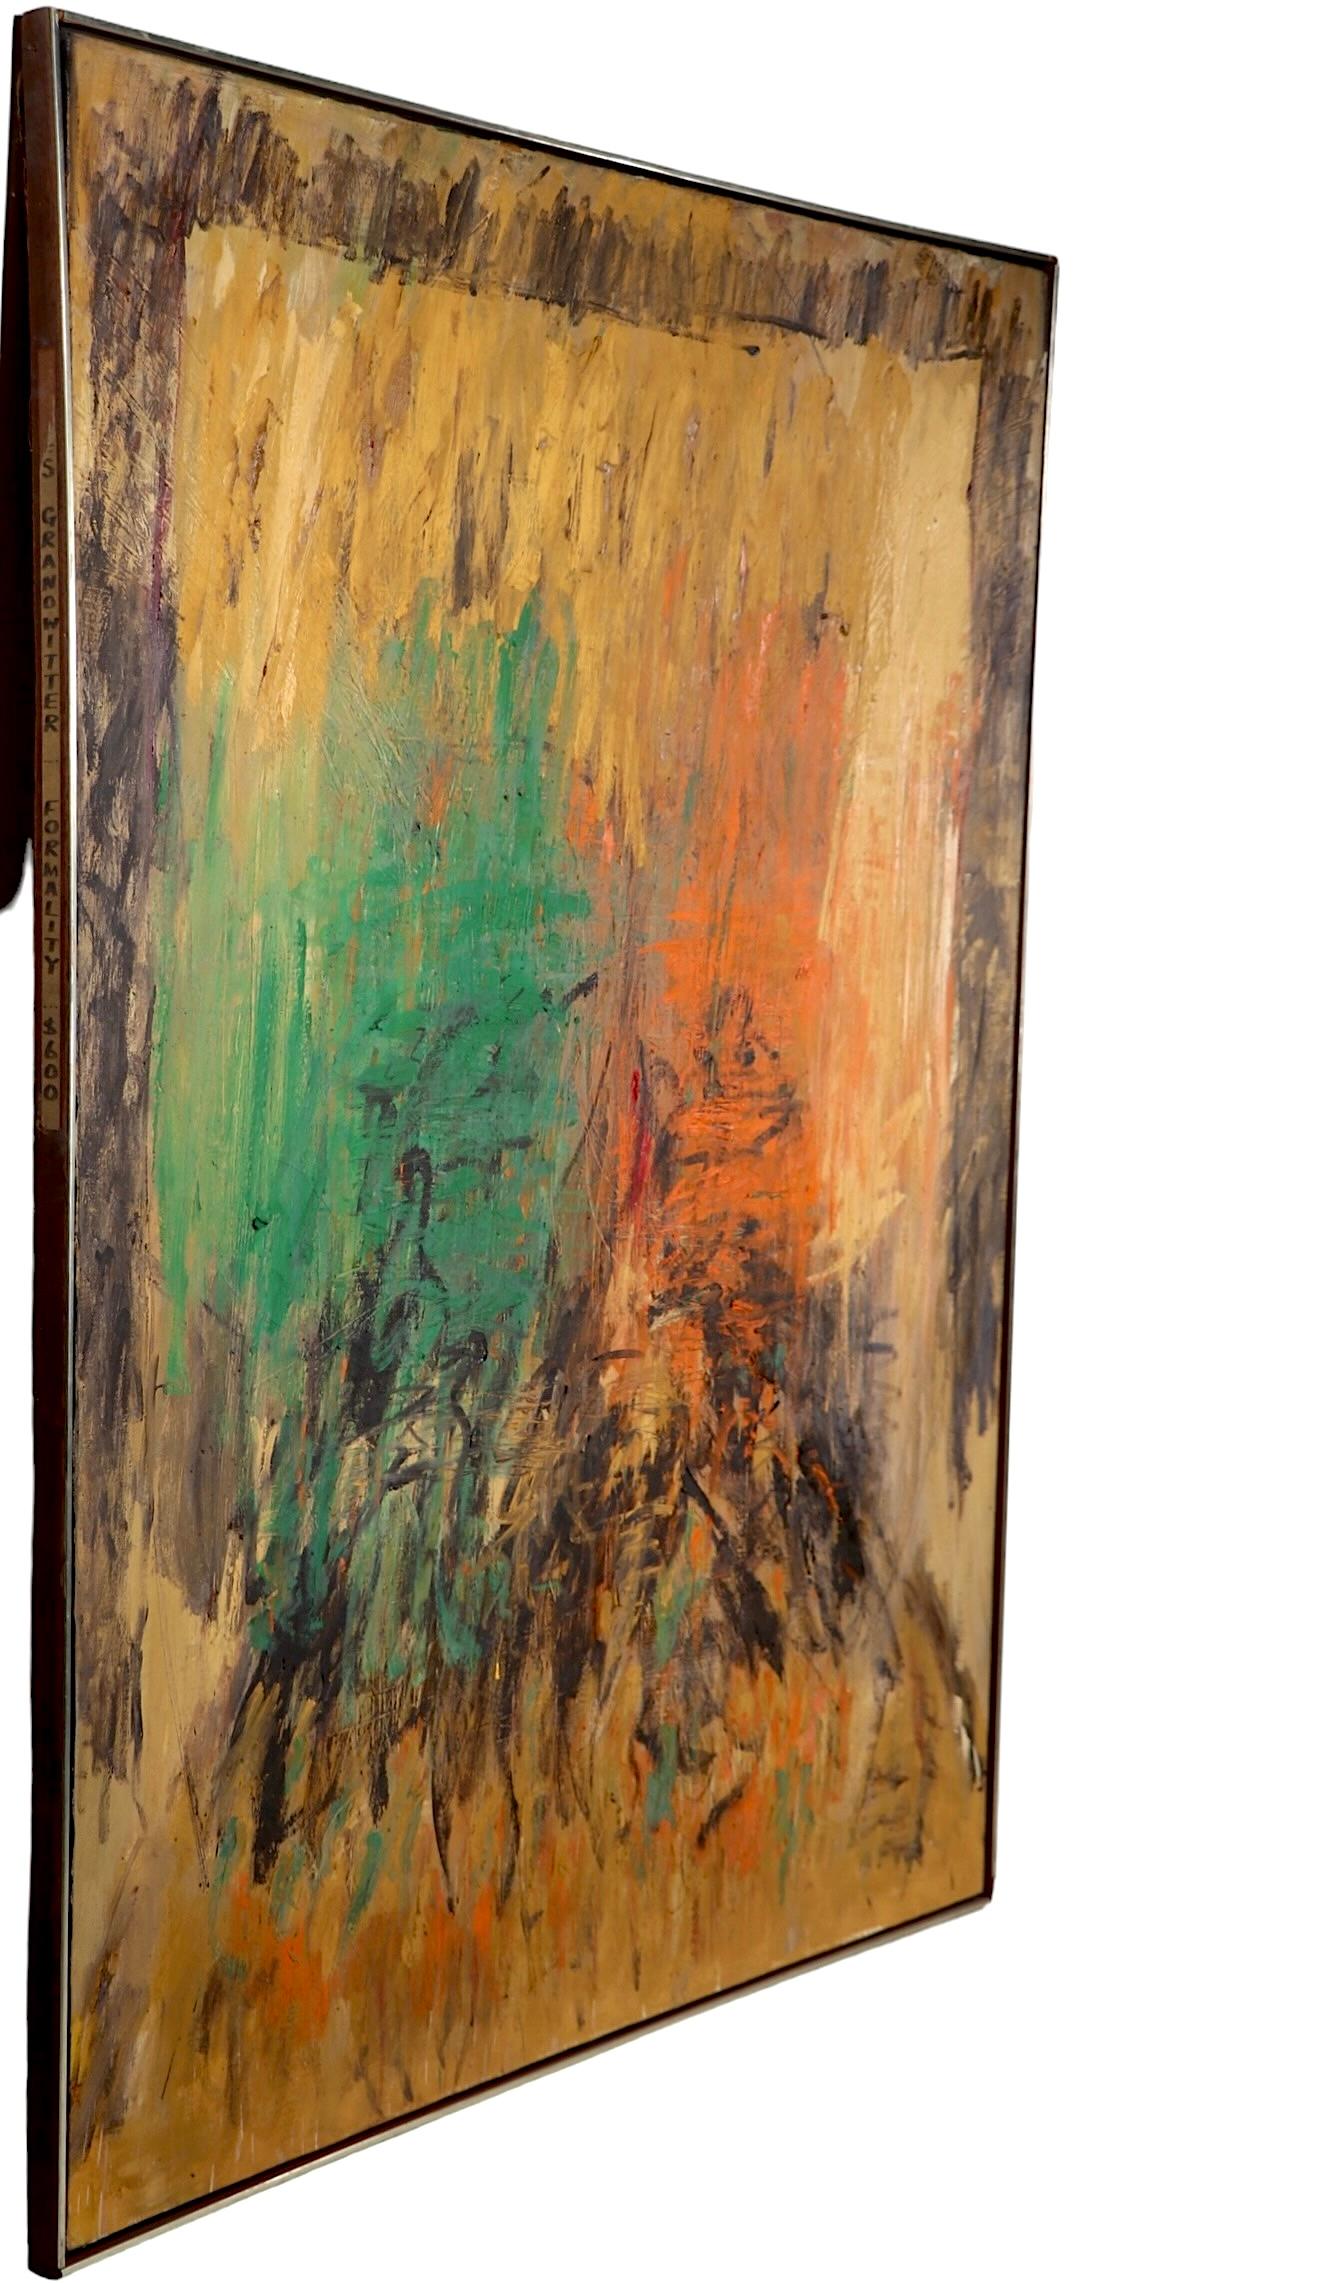 Well done period abstract expressionist acrylic painting by Jules Granowitter, circa 1950/1960's. Jules Granowitter was a Brooklyn born artist, a graduate of Cooper Union, he worked professionally in NYC as an illustrator, cartoonist and a painter.